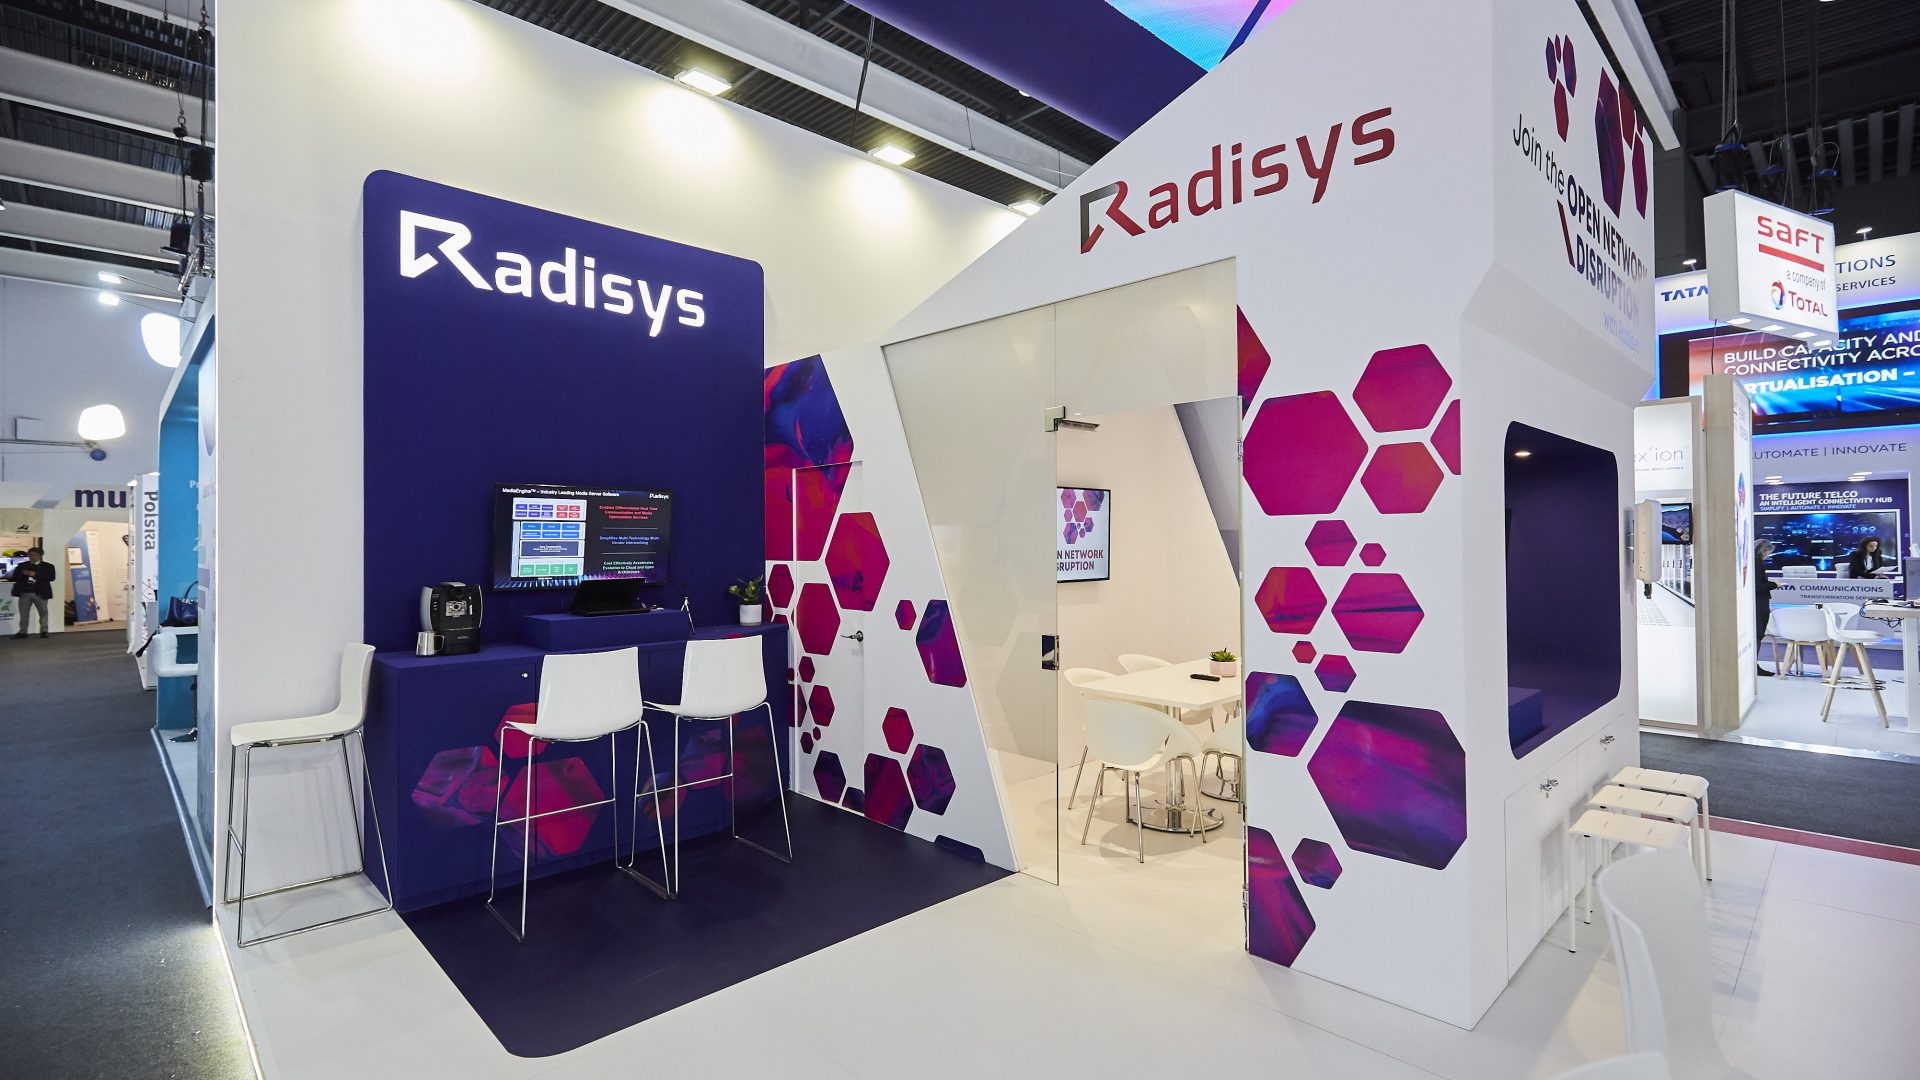 Radisys booth at MWC 2019 - clean and crisp design